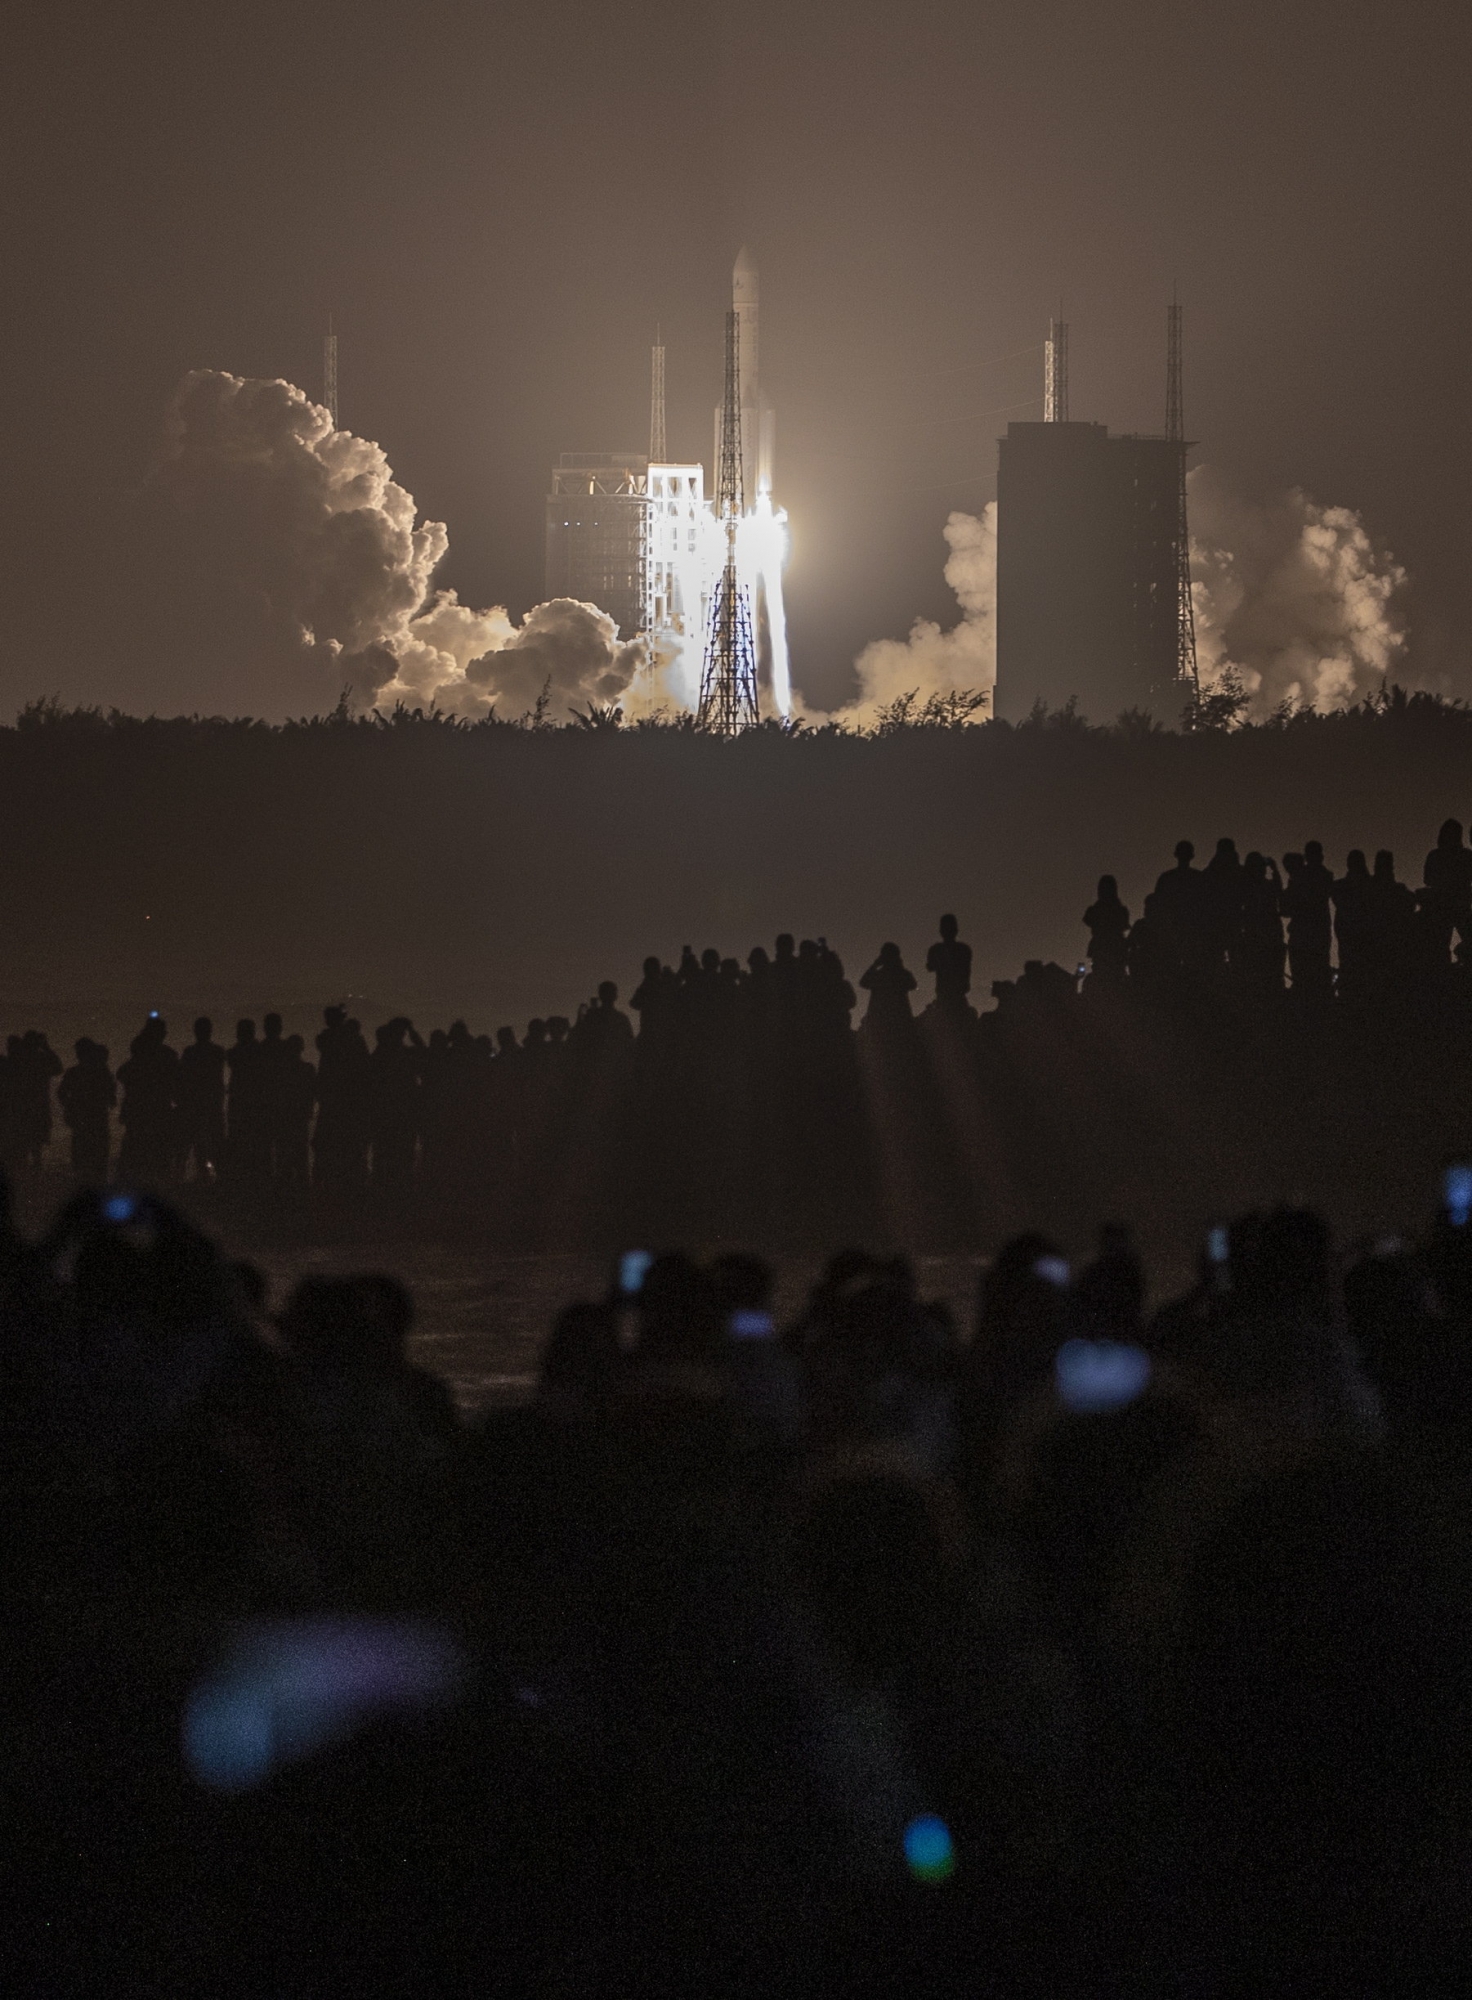 epa08838328 People watch a Long March 5 rocket carrying the Chang'e-5 lunar probe launching from the Wenchang Space Center in Wenchang, Hainan Island, China, 24 November 2020. China launched a mission to the Moon with an unmanned spacecraft on 24 November 2020 to bring back lunar rocks, the first country to attempt to retrieve material from the Moon in decades.  EPA/STR CHINA OUT ArcInfo